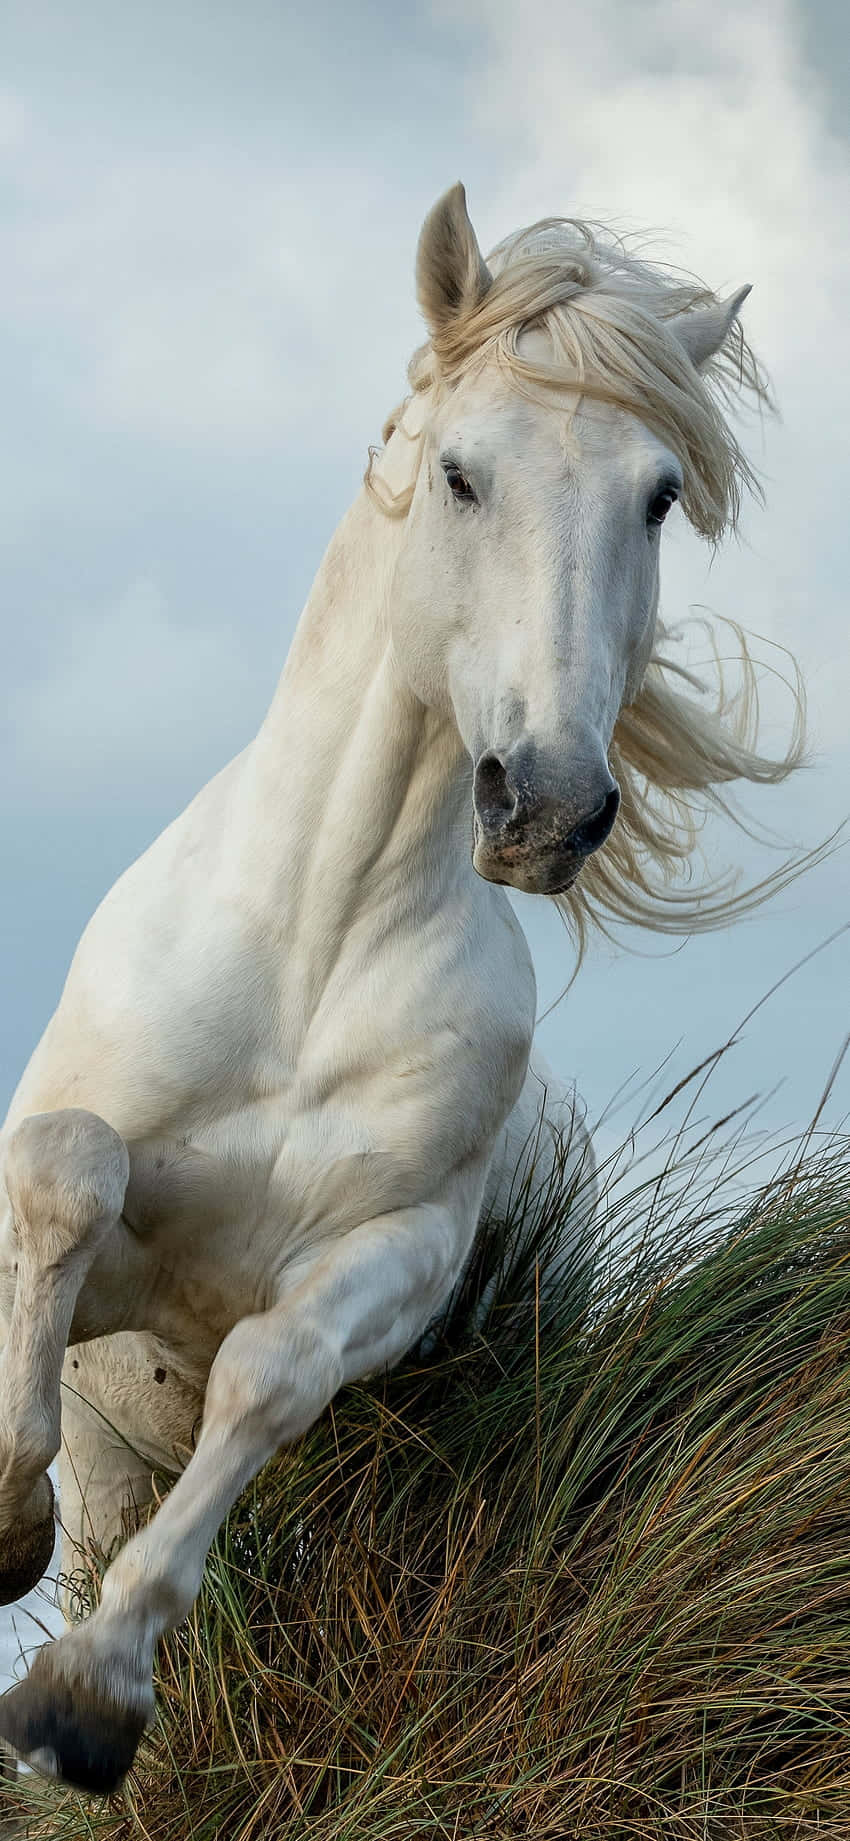 Get Horsepower and Beauty with the Beautiful Horse Iphone Wallpaper